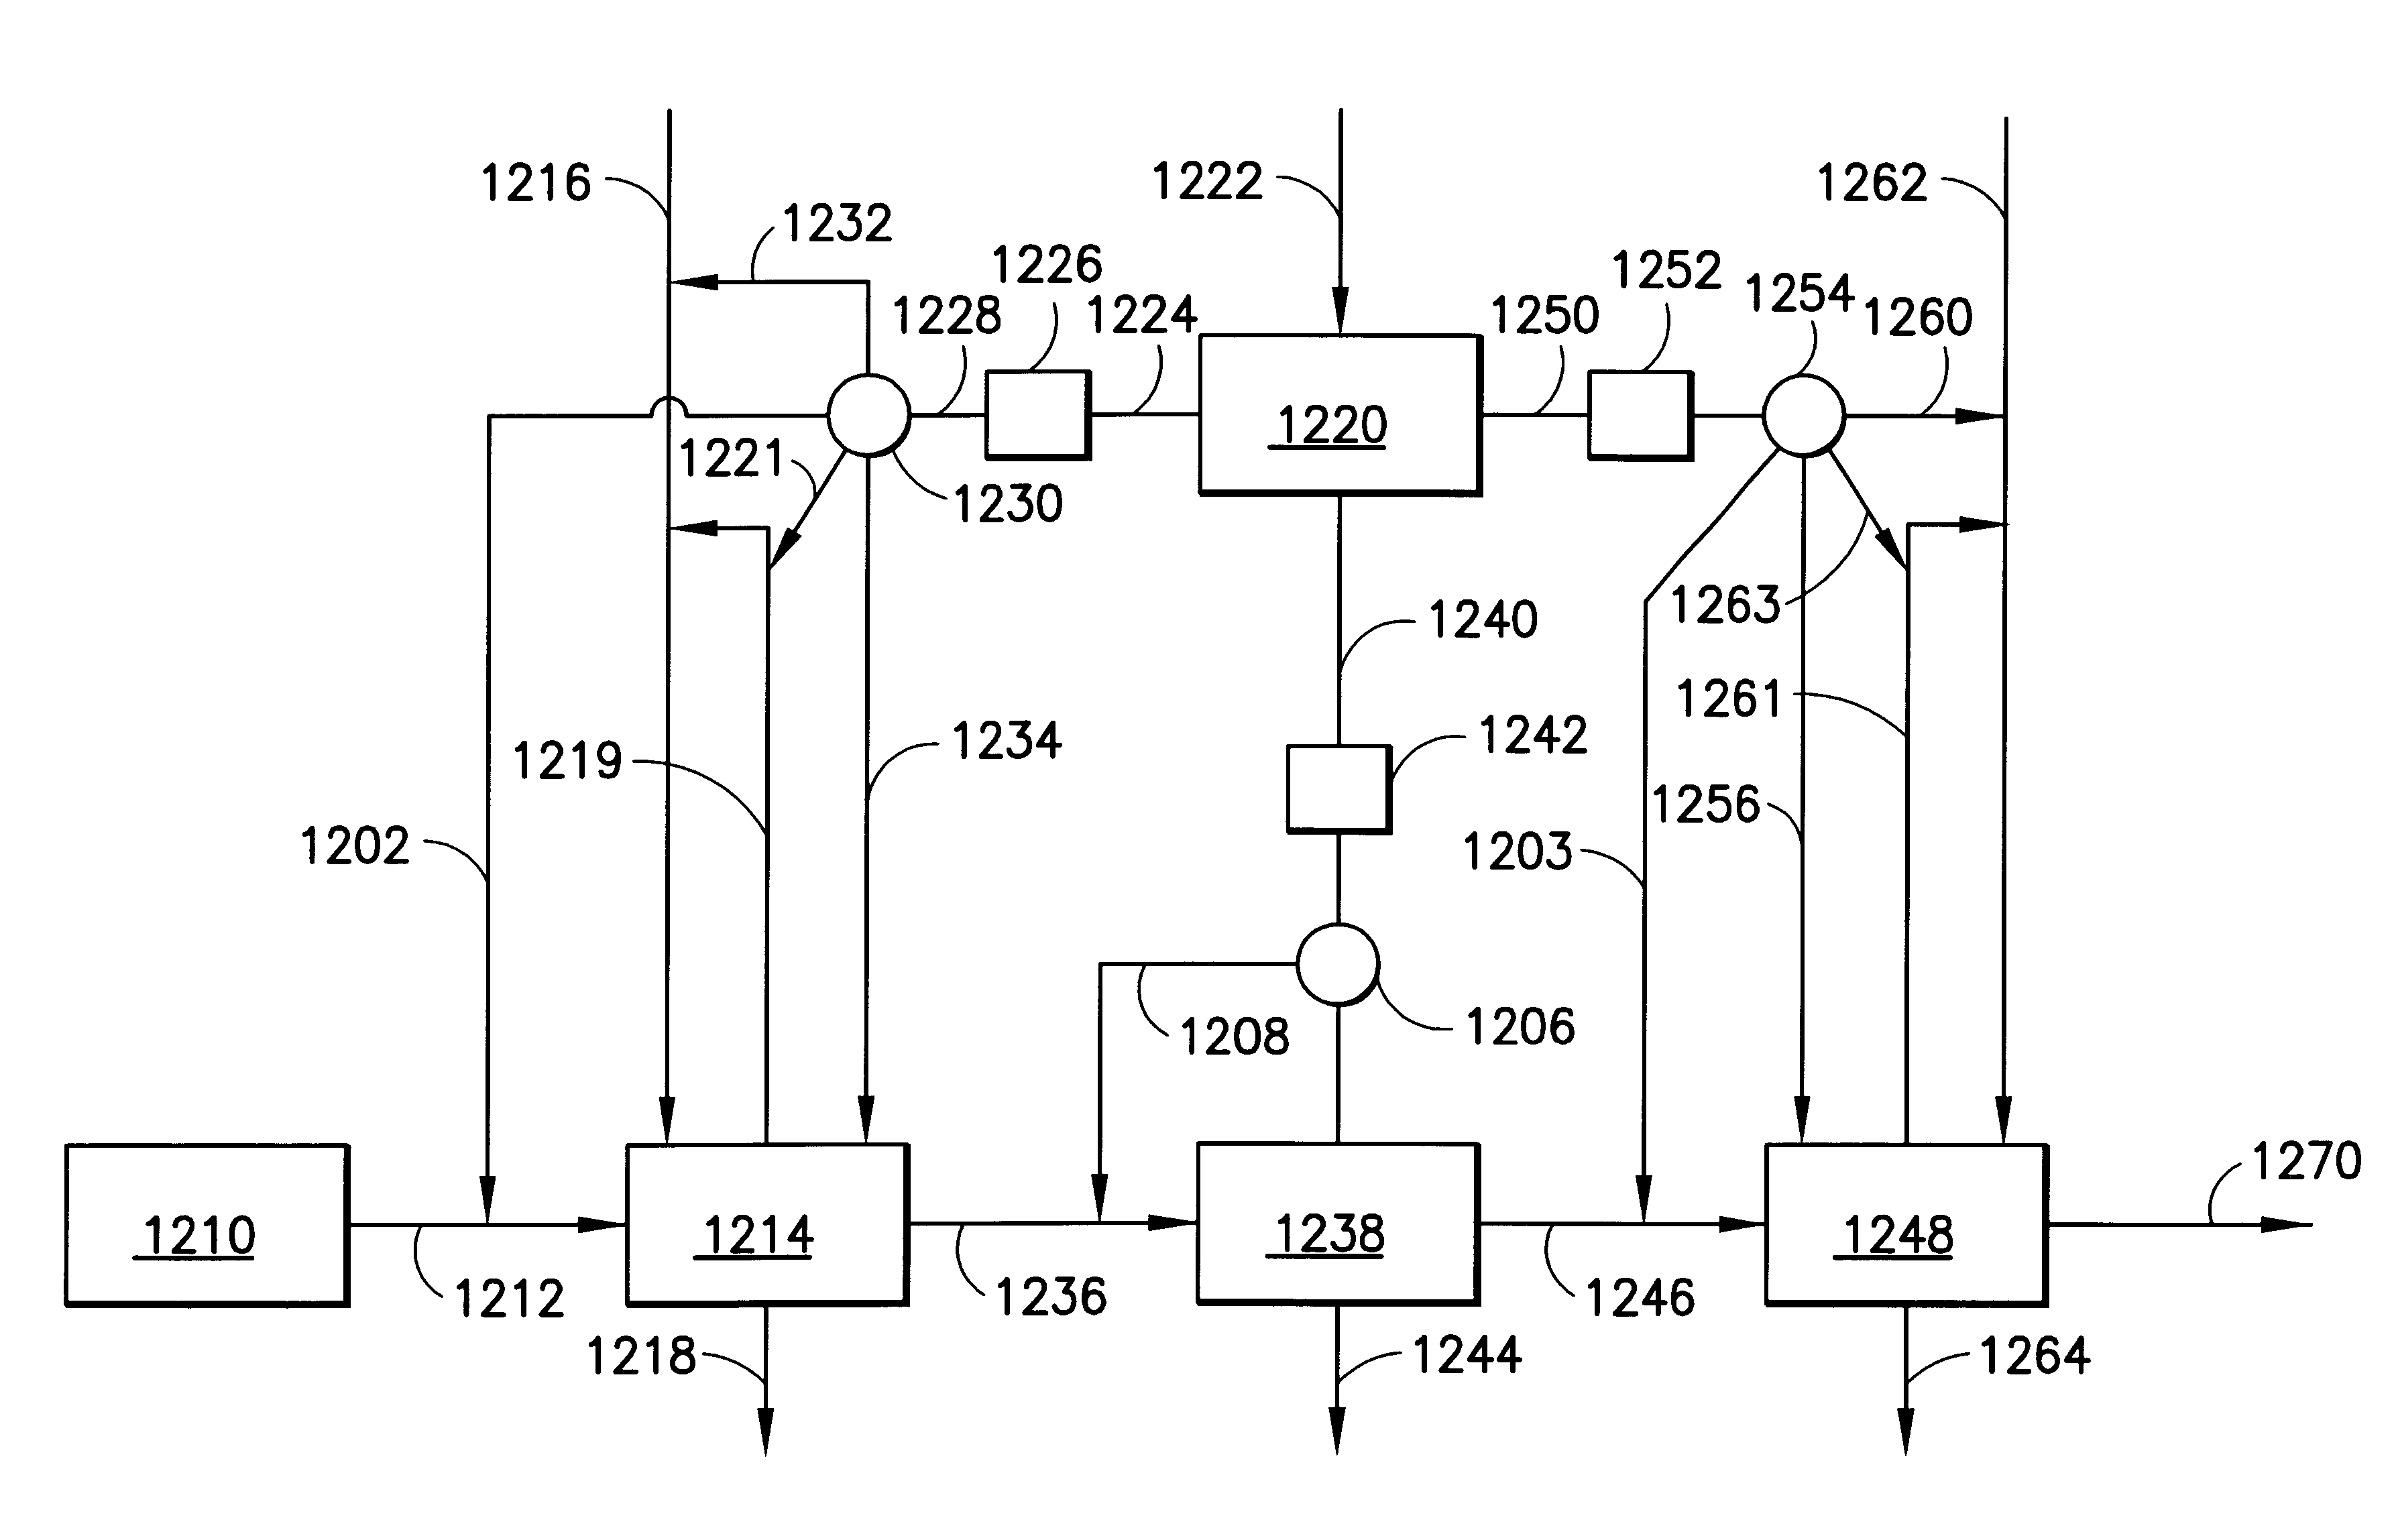 Effluent gas stream treatment system having utility for oxidation treatment of semiconductor manufacturing effluent gases